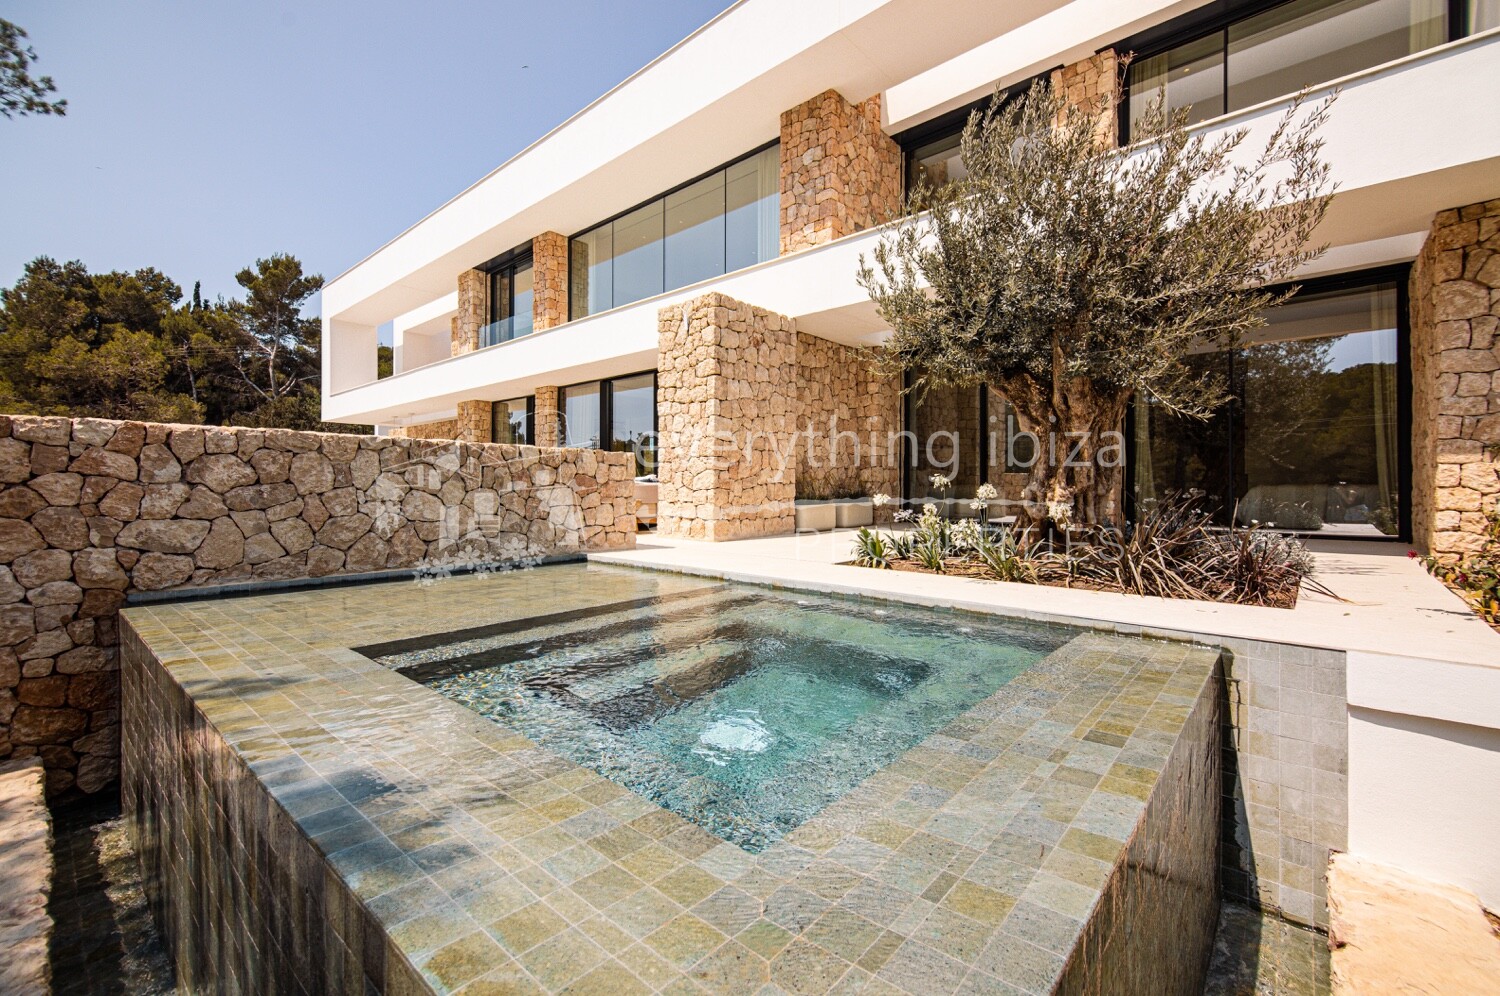 Luxury Minimalistic New Build Villas Located at Roca Llisa, ref. 1613, for sale in Ibiza by everything ibiza Properties